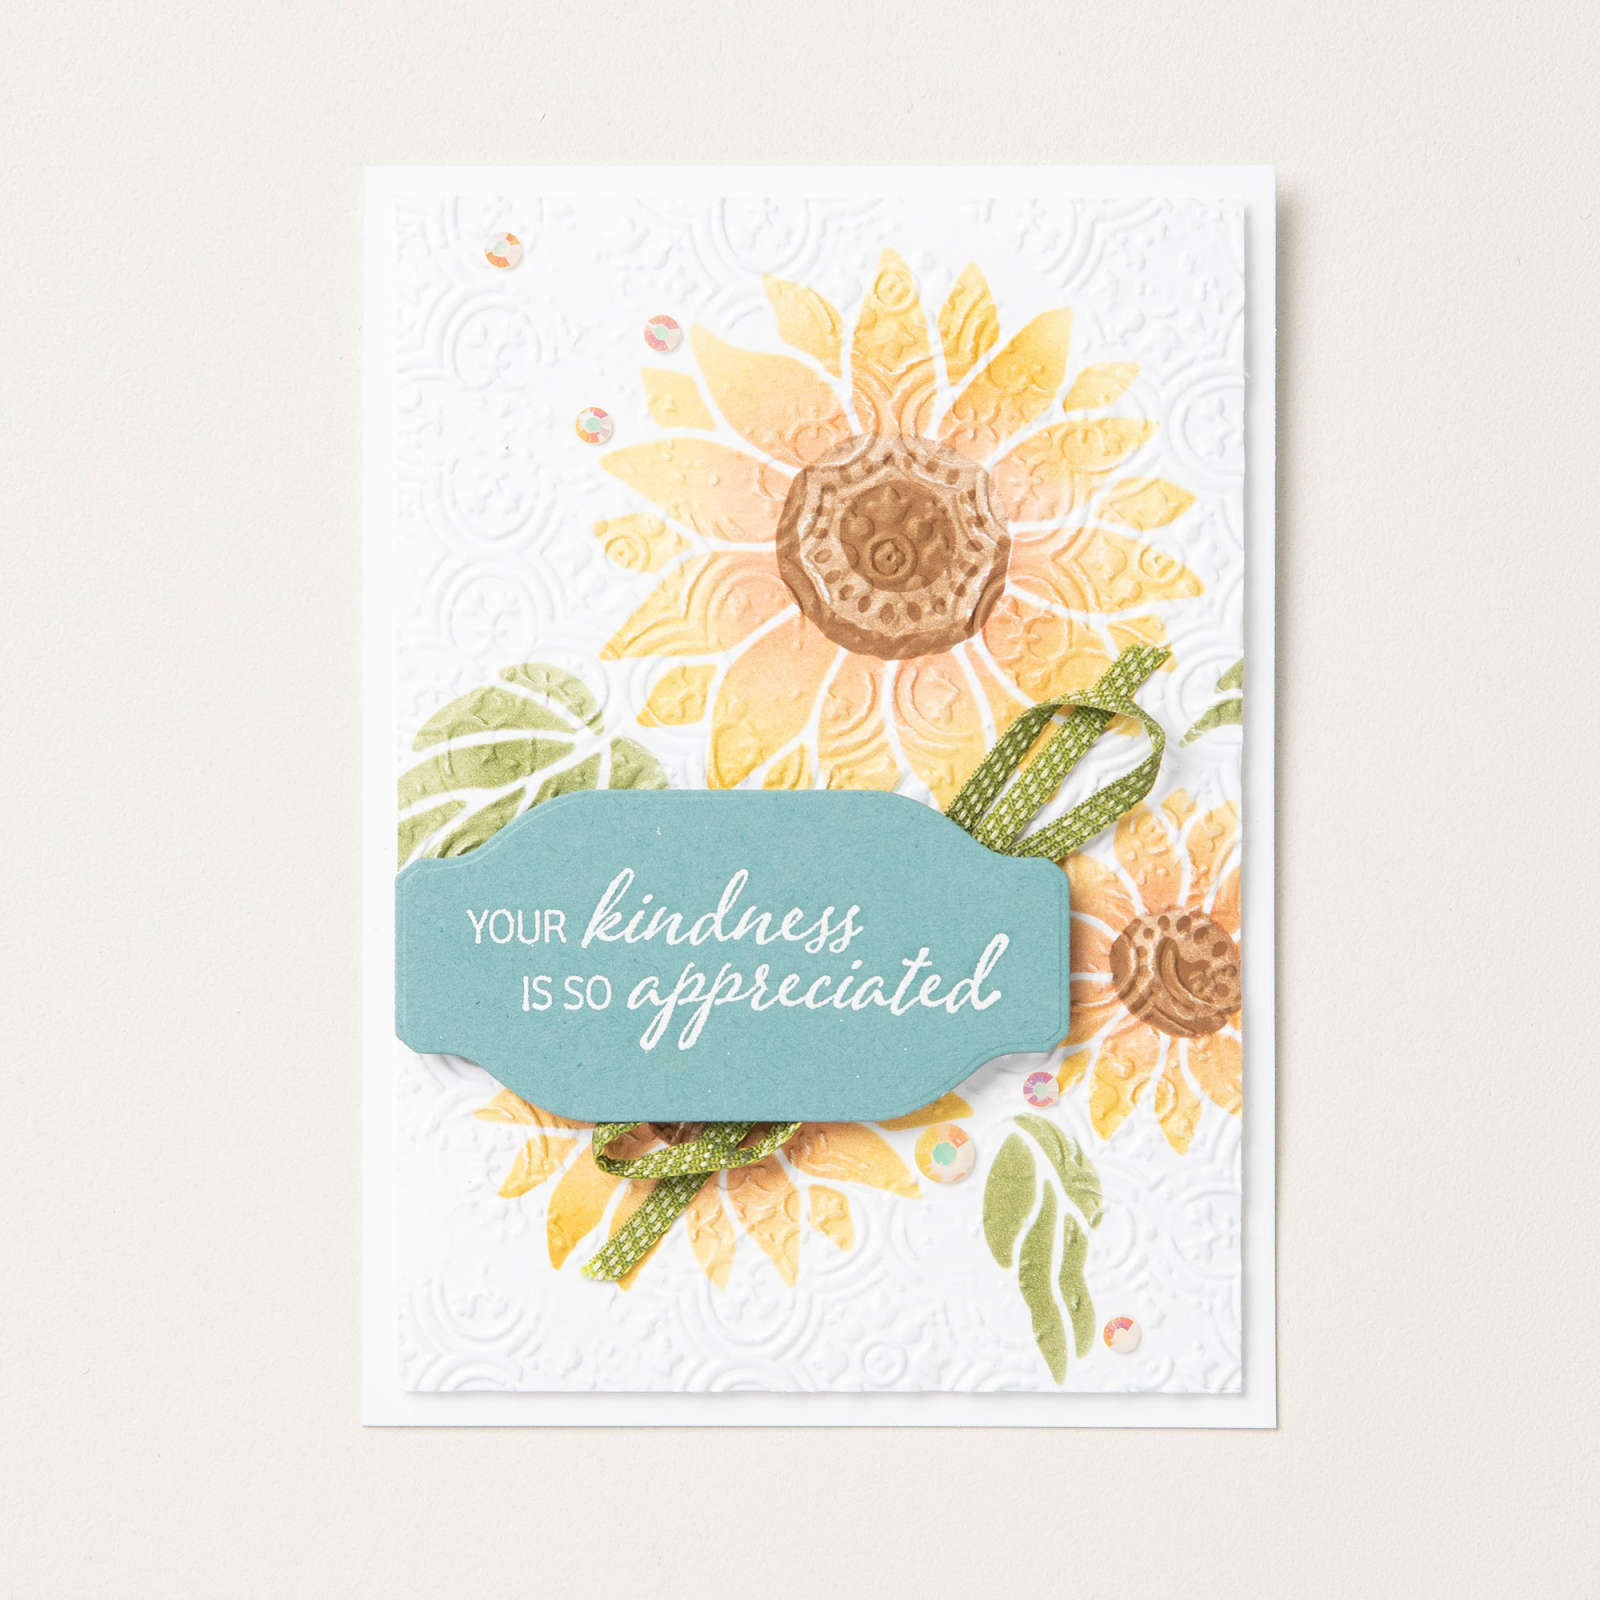 Something Fancy Dies by Stampin' Up!